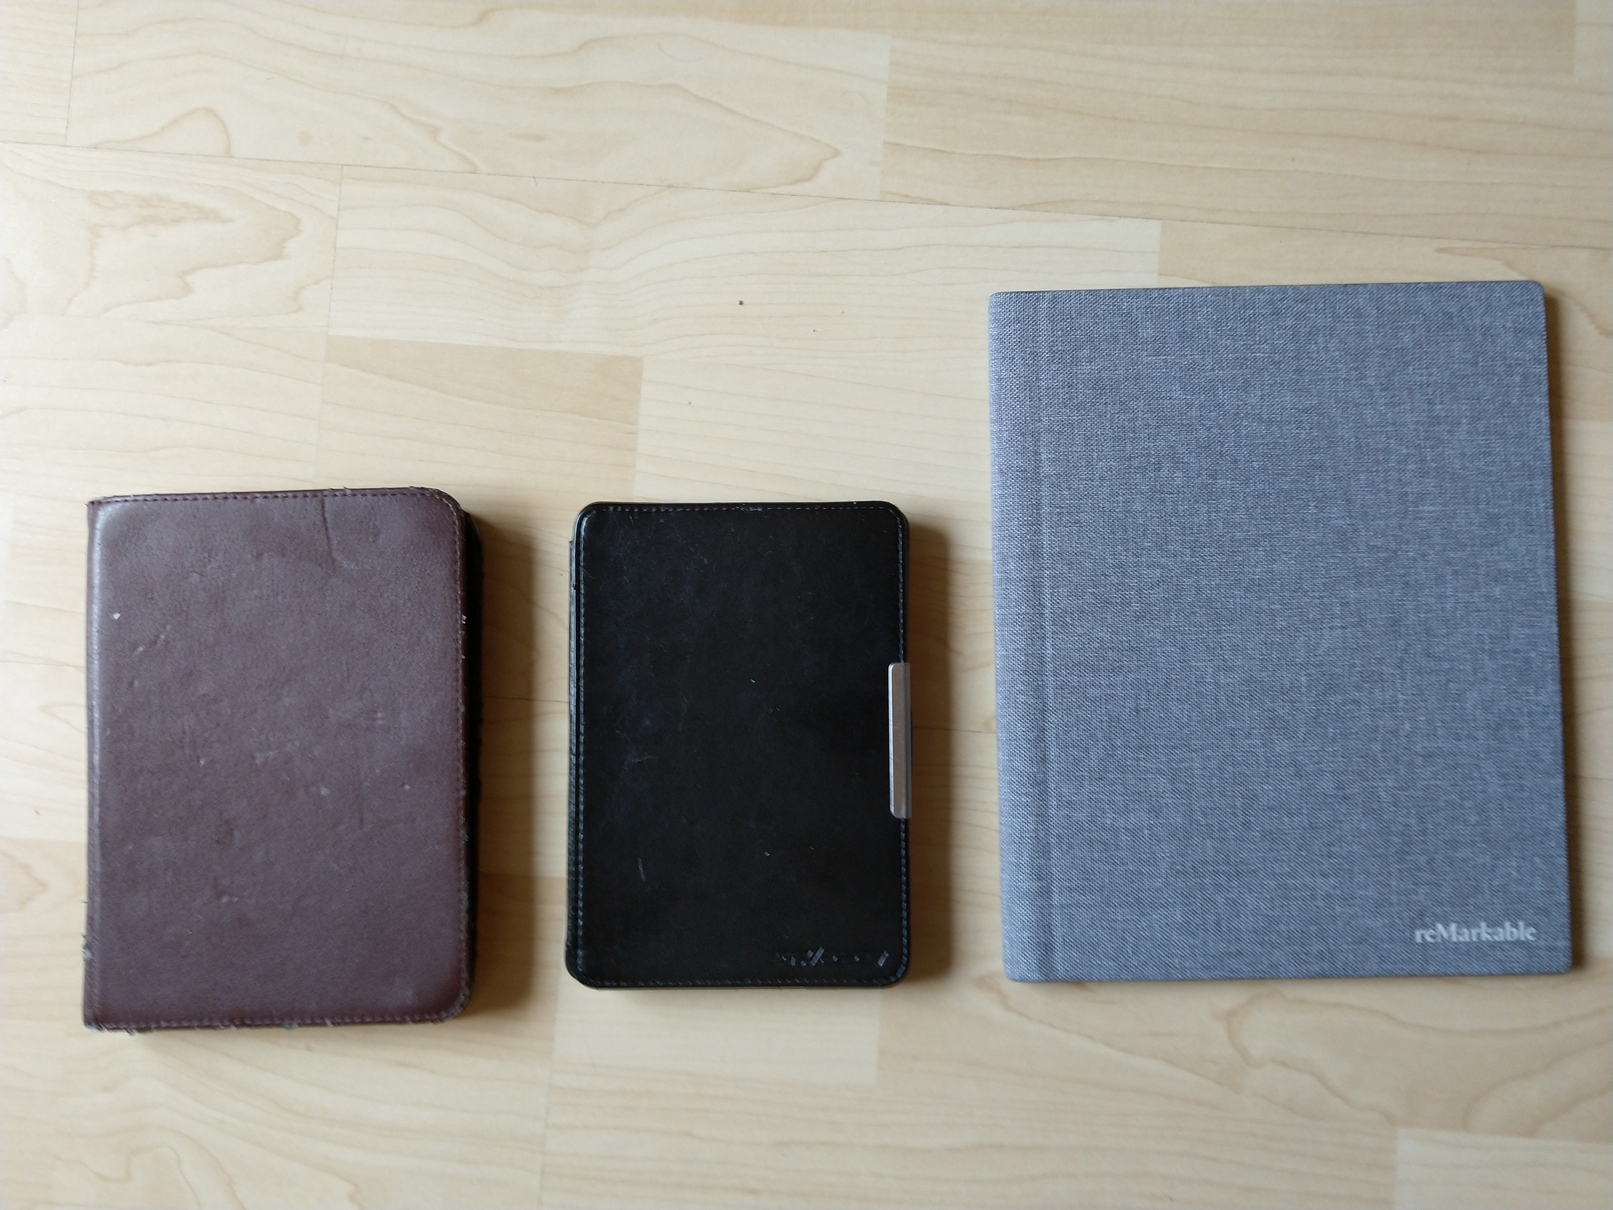 From left to right: Tolino Shine, Amazon Kindle, reMarkable2